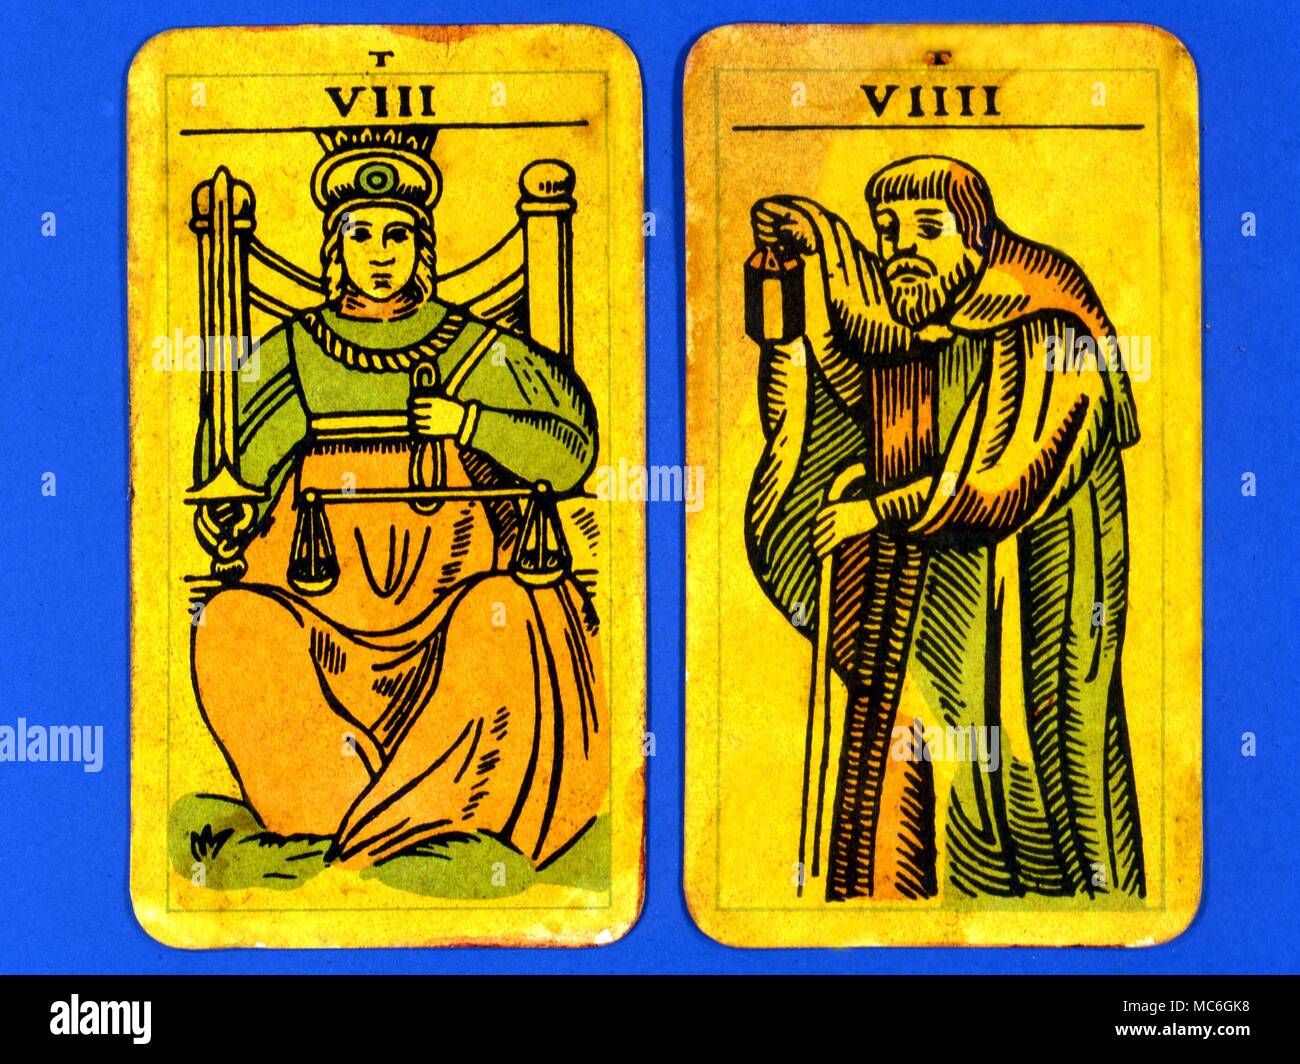 Tarot Cards-Majo Arcana- The Parisian Tarot. Card 8. The Justice, and Card 9, The Hermit. Two cards from a Major Arcana picture Tarot, probably designed in an archaizing style in loose imitation of the Rosicrucian deck designed by Pamela Coleman Smith, alongside A.E.Waite, and various earlier decks, such as that published by Encausse (Papus) in The Tarot of the Bohemians at the end of the 19th century, post 1905, but earlier than 1912. The name Parisian Tarot was given by the owner of the deck - it might however be called the Tau Tarot, from the intriguing letter Tau at the head of each card. Stock Photo